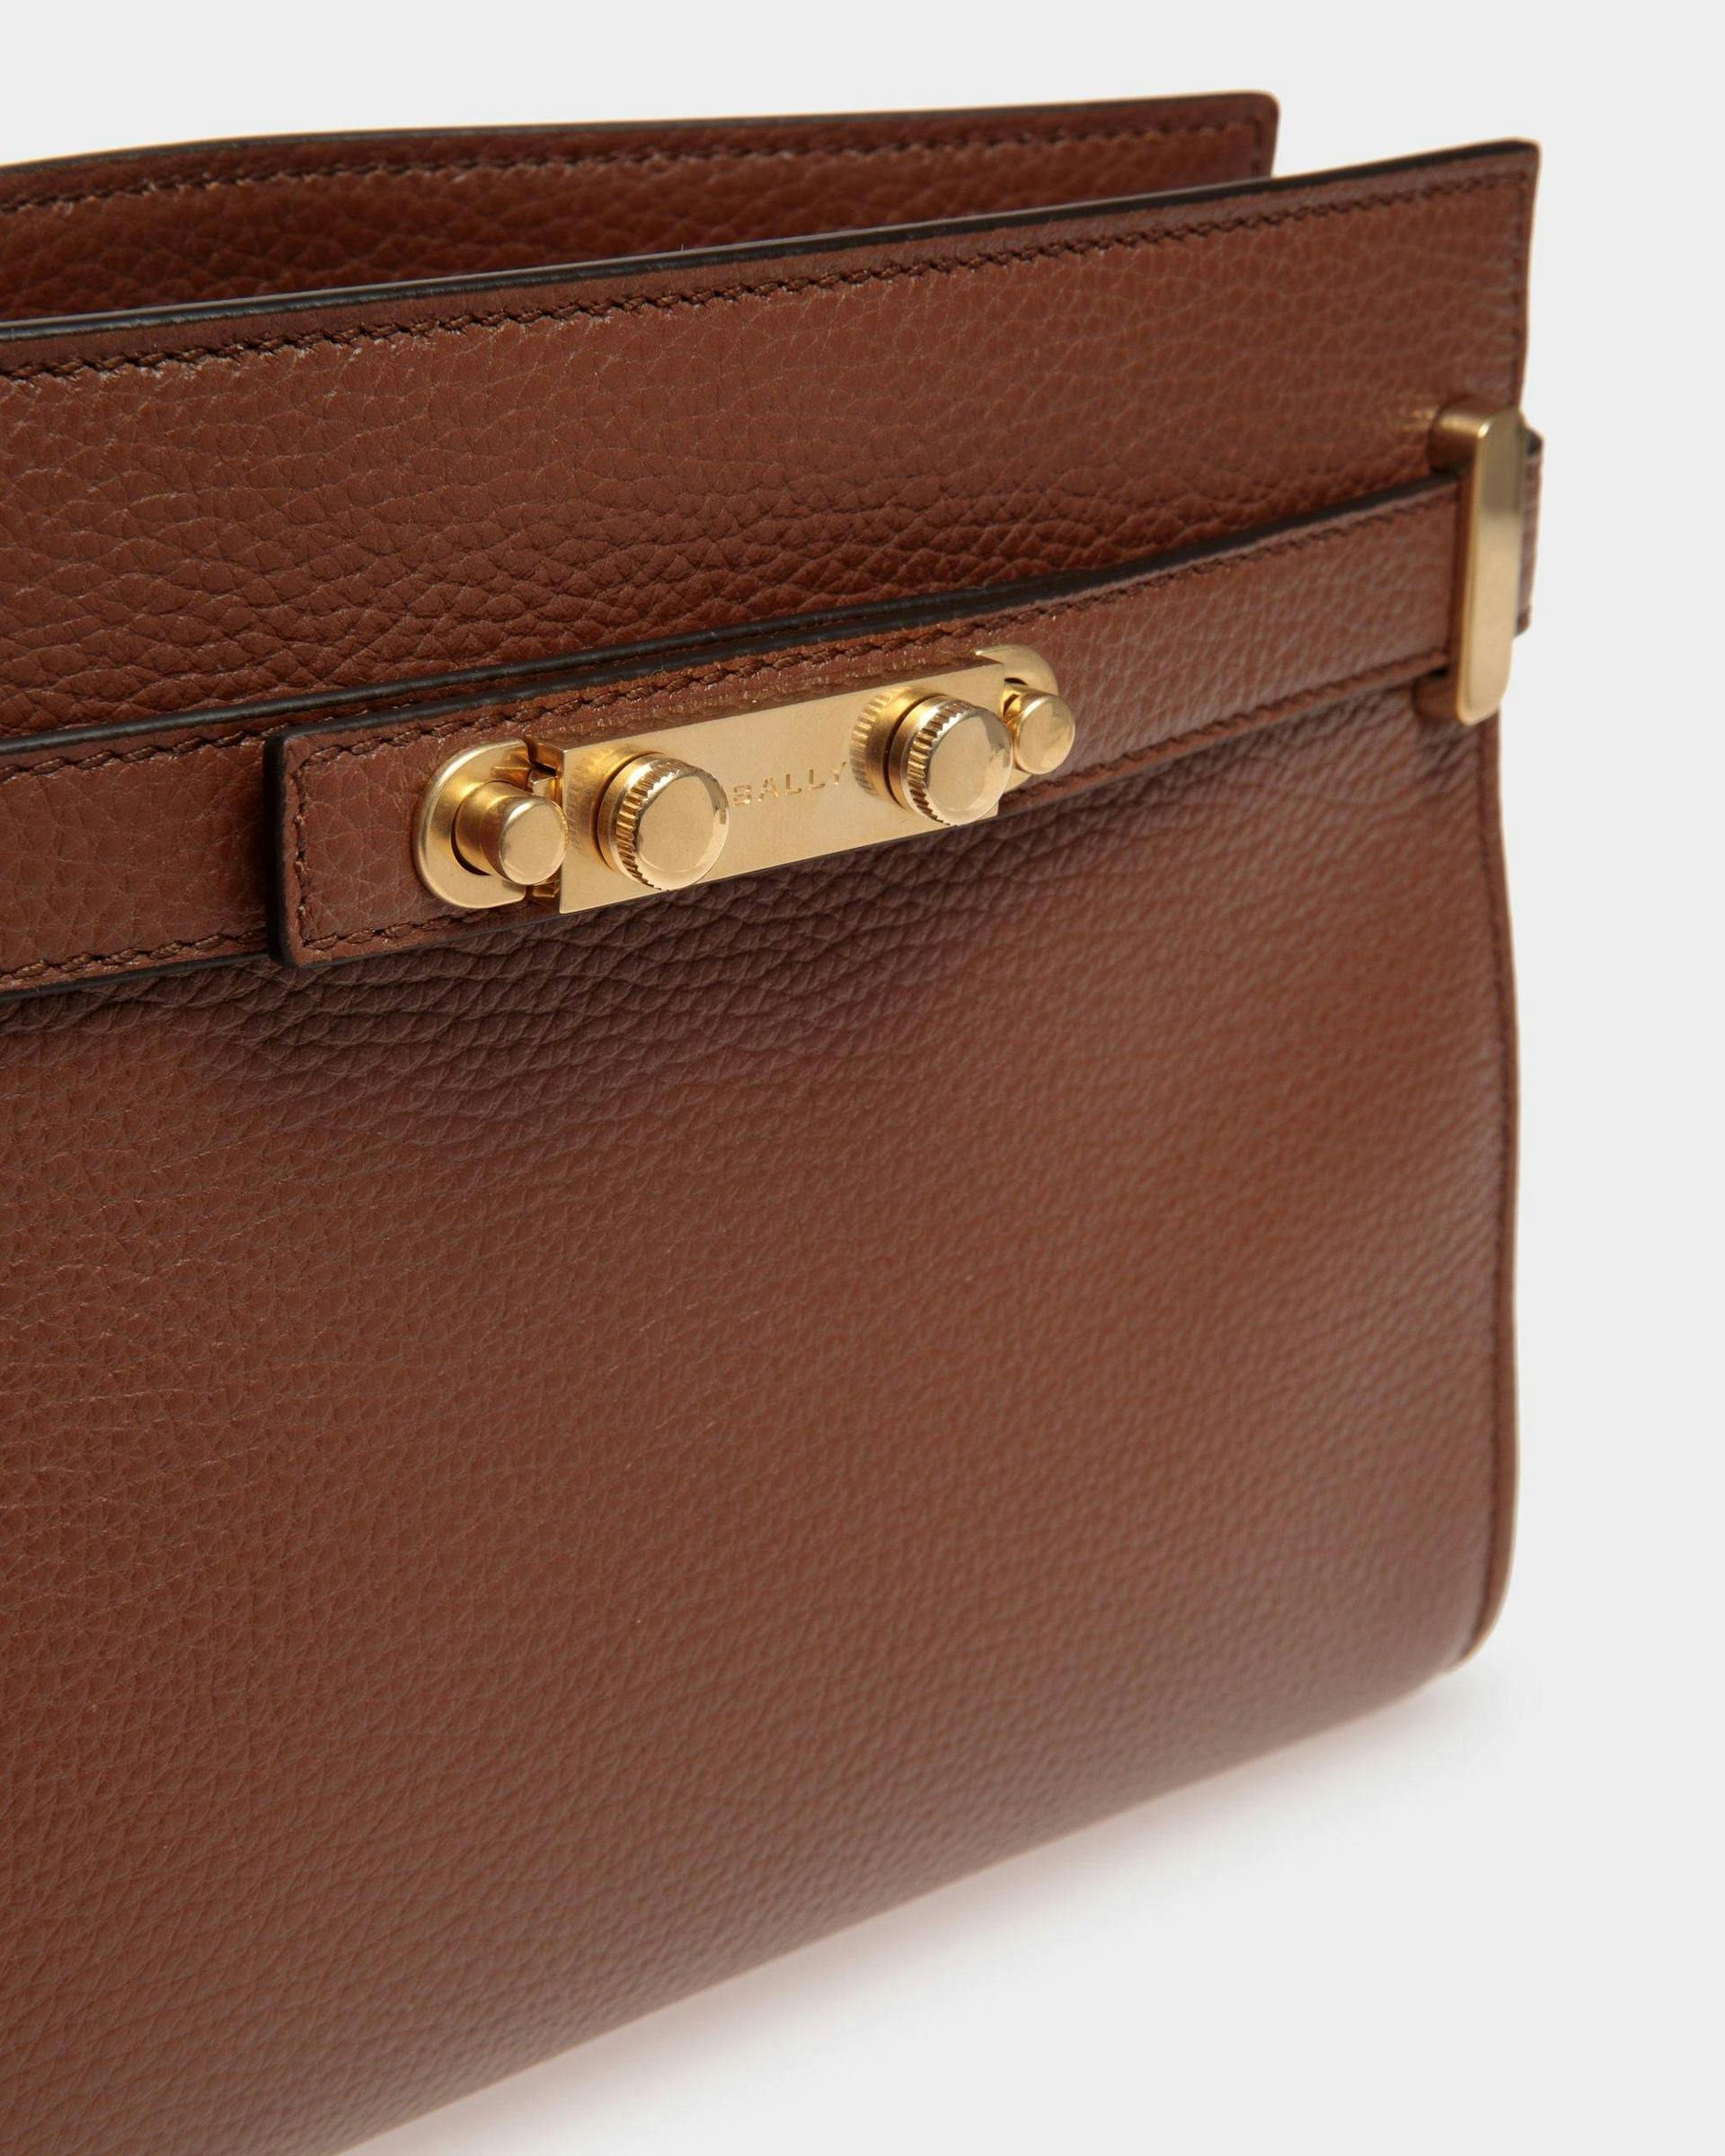 Women's Carriage Crossbody Bag in Brown Grained Leather | Bally | Still Life Detail